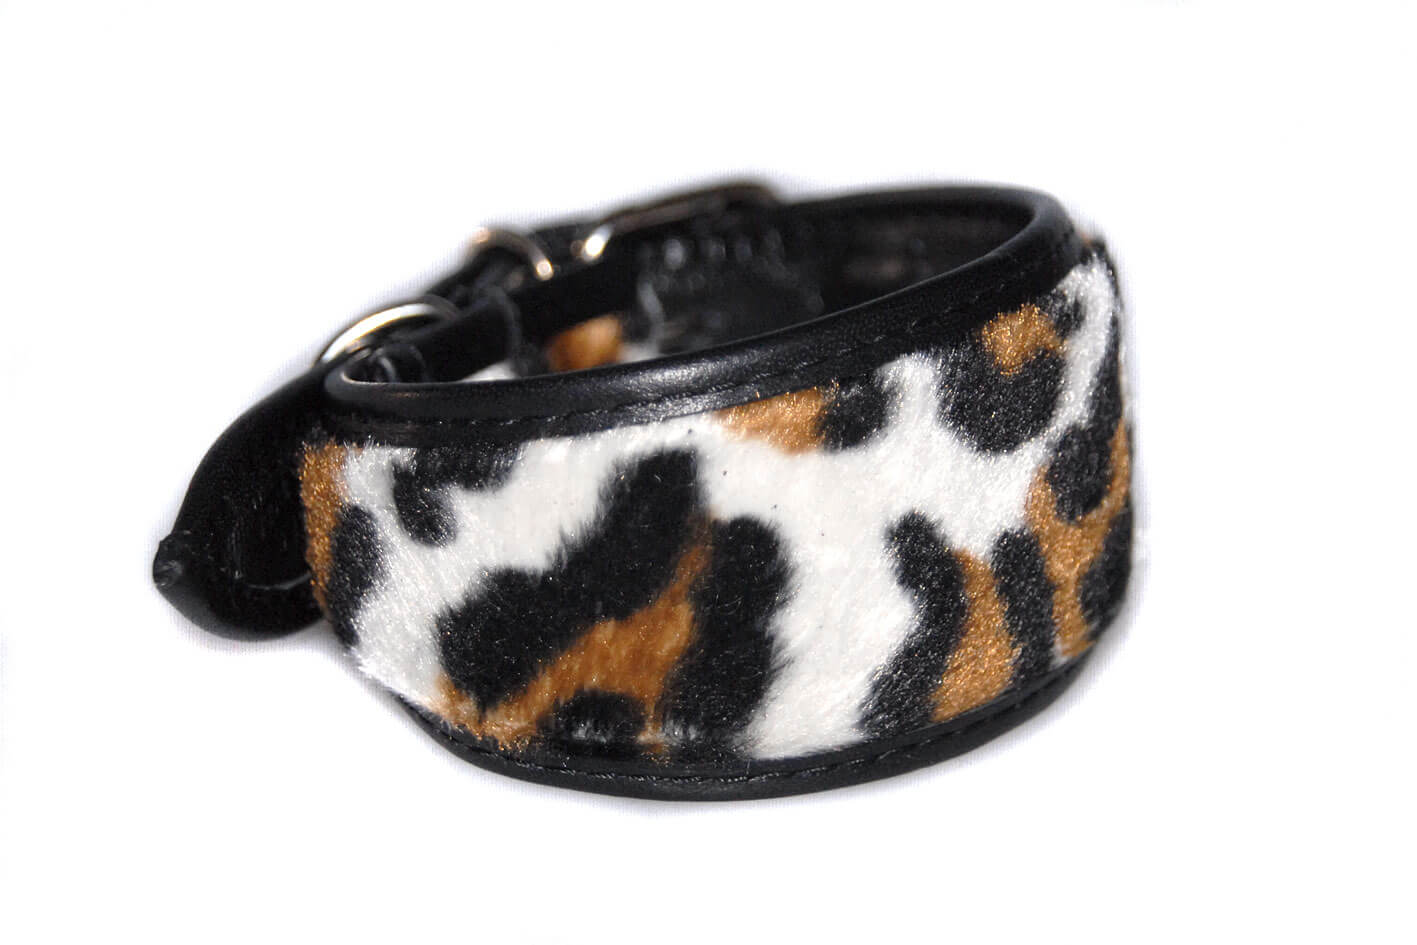 Black leopard whippet collar is available in size XS to fit smaller WHippets, puppies and Italian Greyhounds